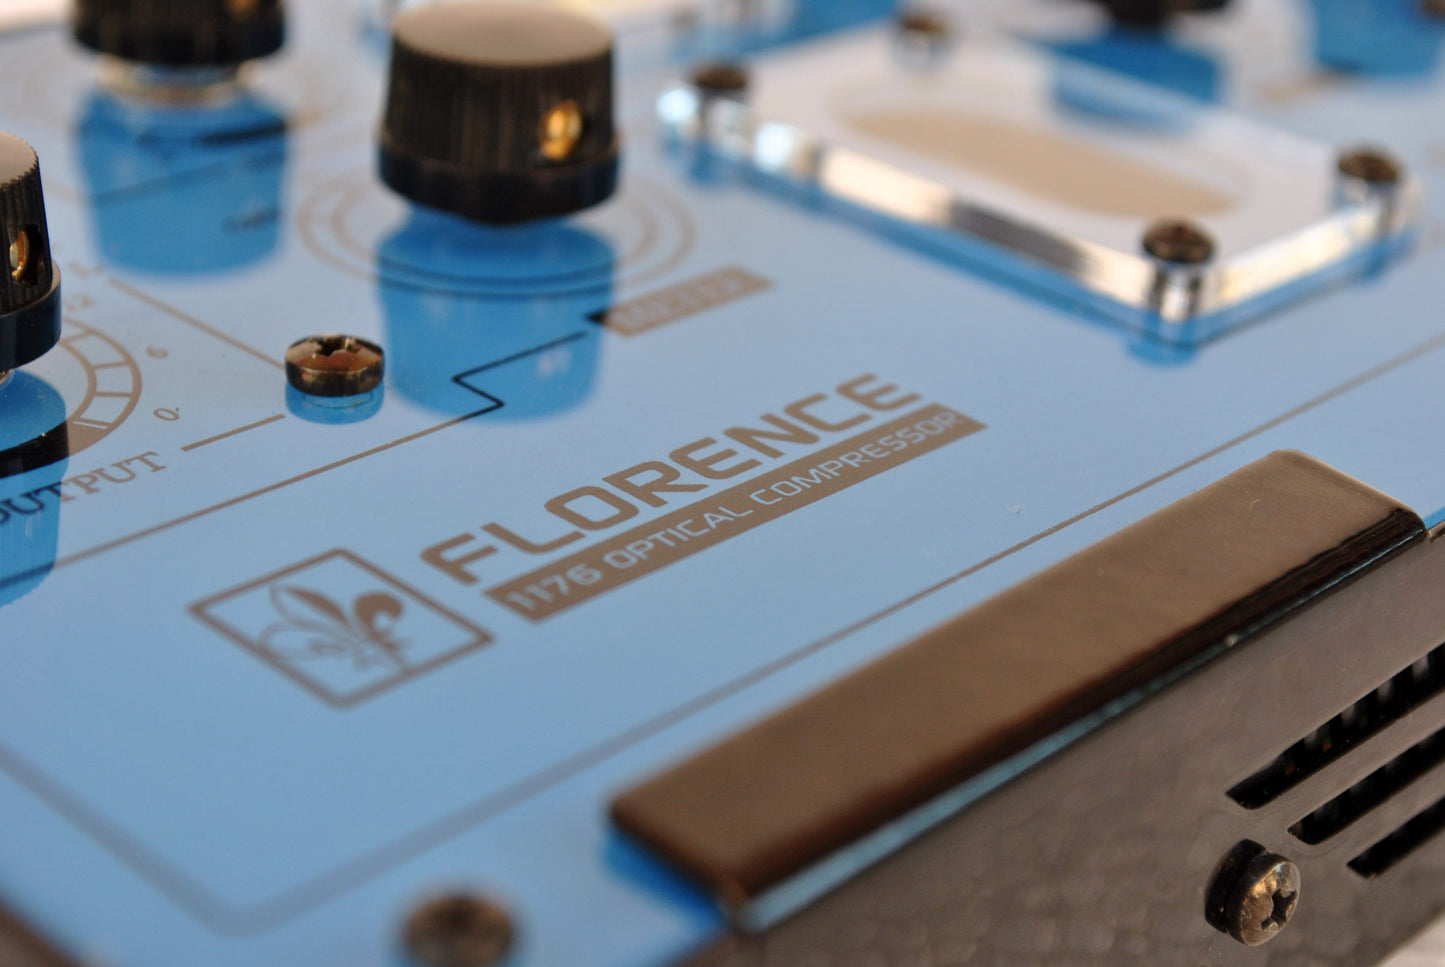 FLORENCE (1176-style optical compressor) *discontinued*